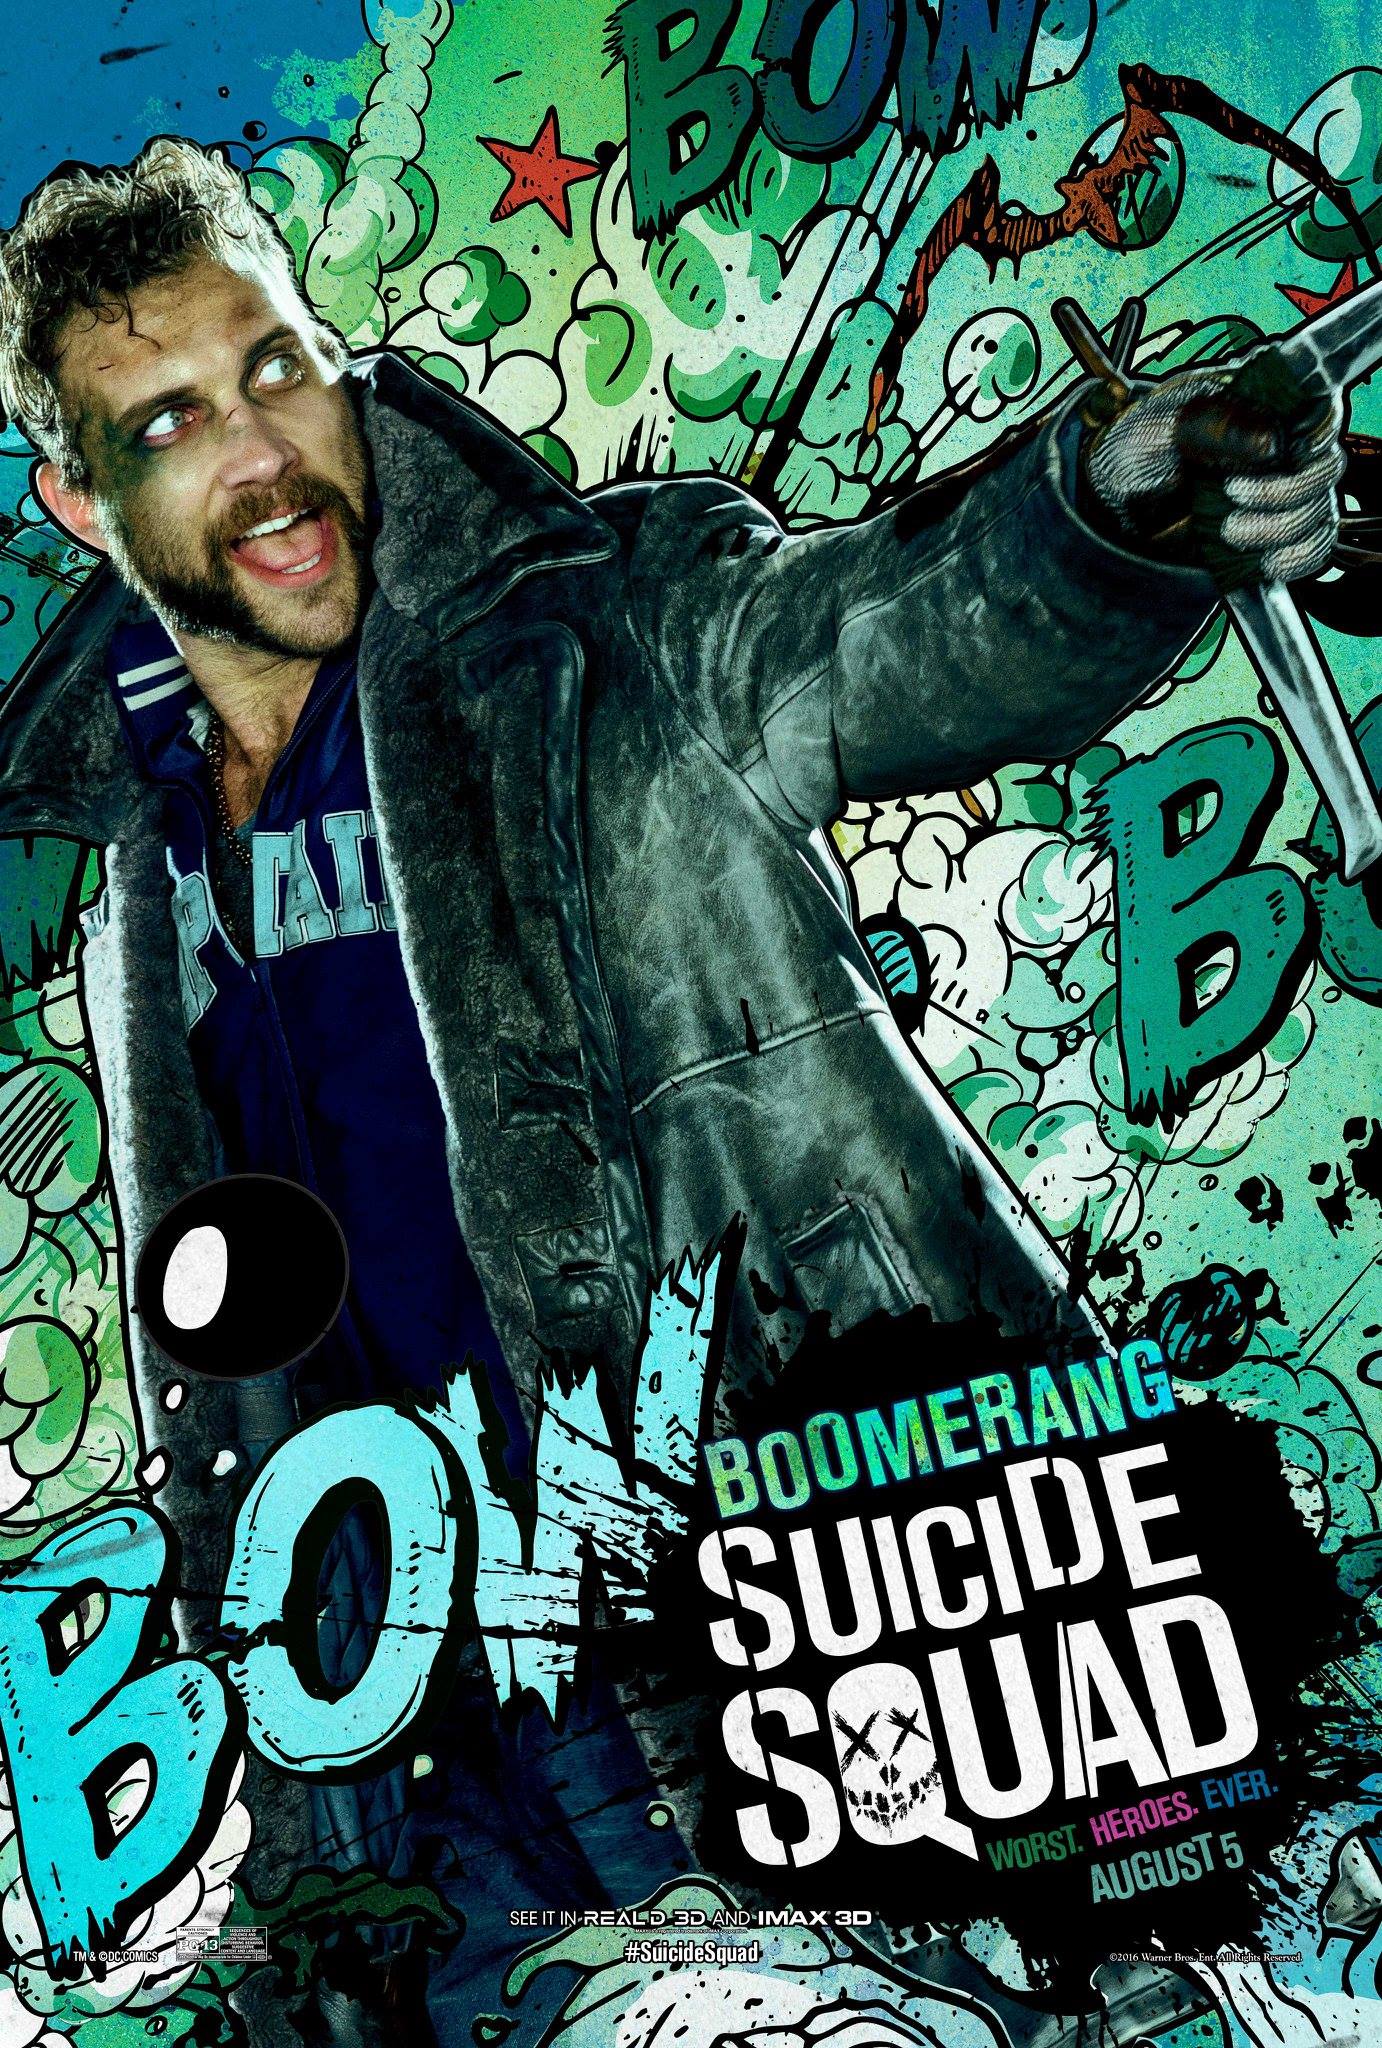 Captain Boomerang from Suicide Squad.